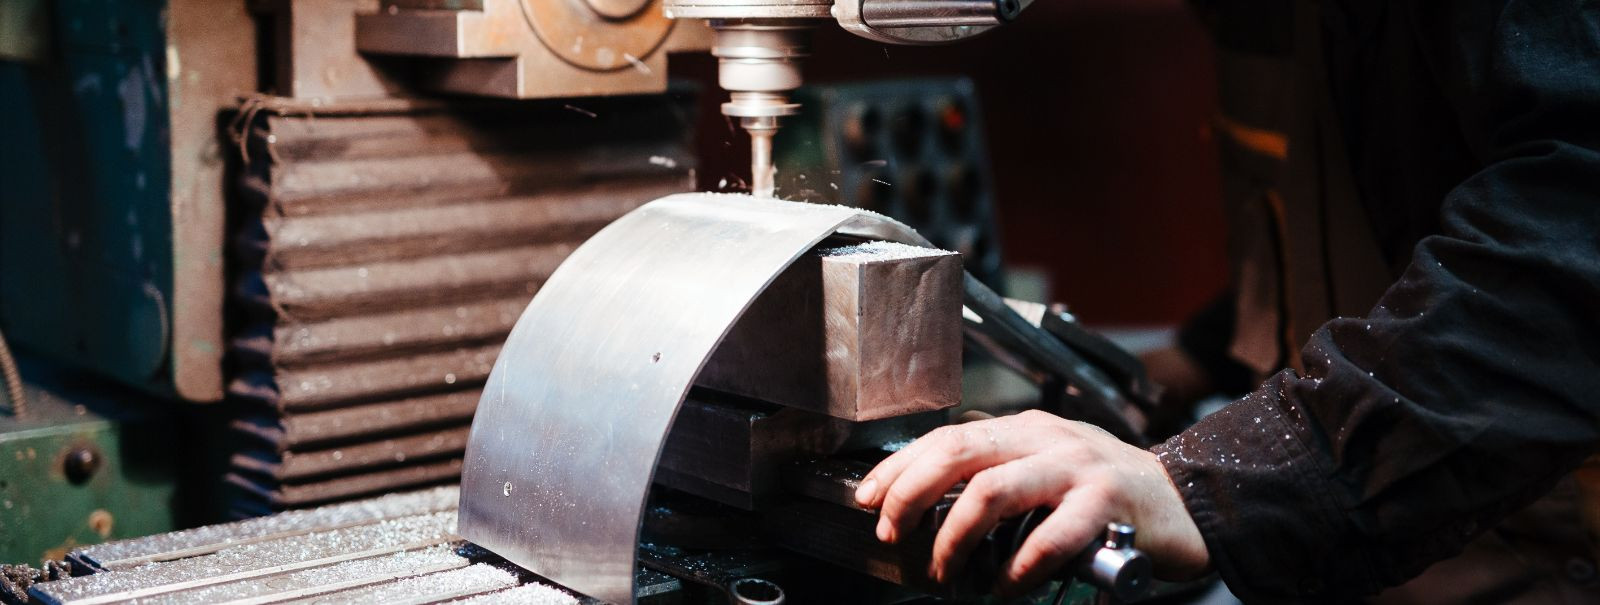 Despite the technological advancements that have transformed the manufacturing industry, manual machining remains an indispensable skill. The tactile feedback a